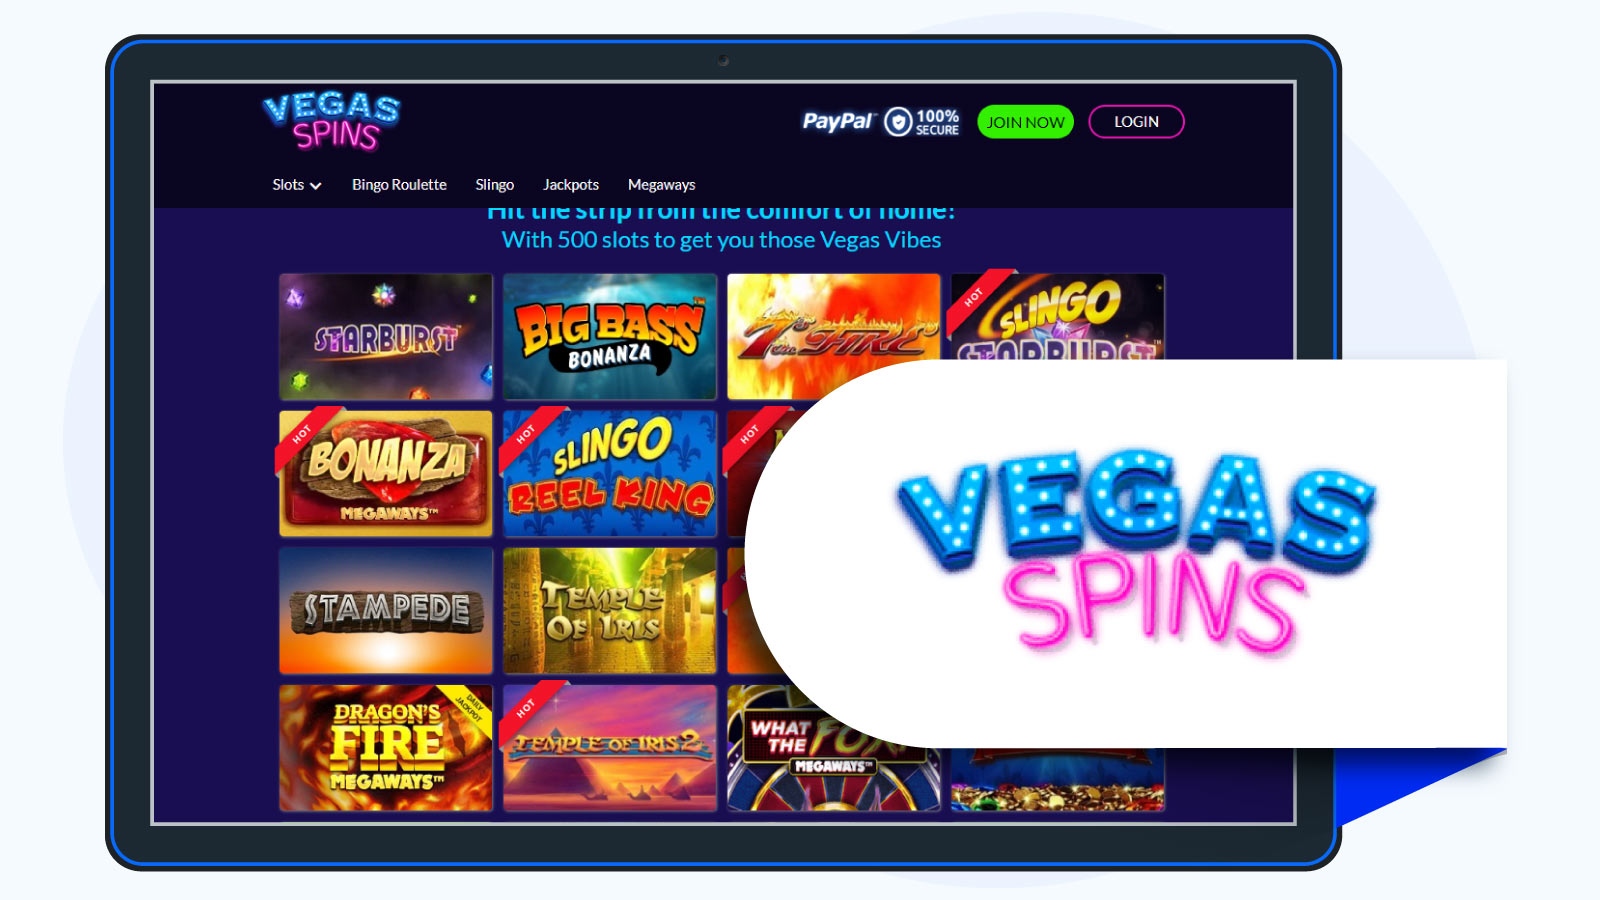 Vegas Spins Casino slot games slection